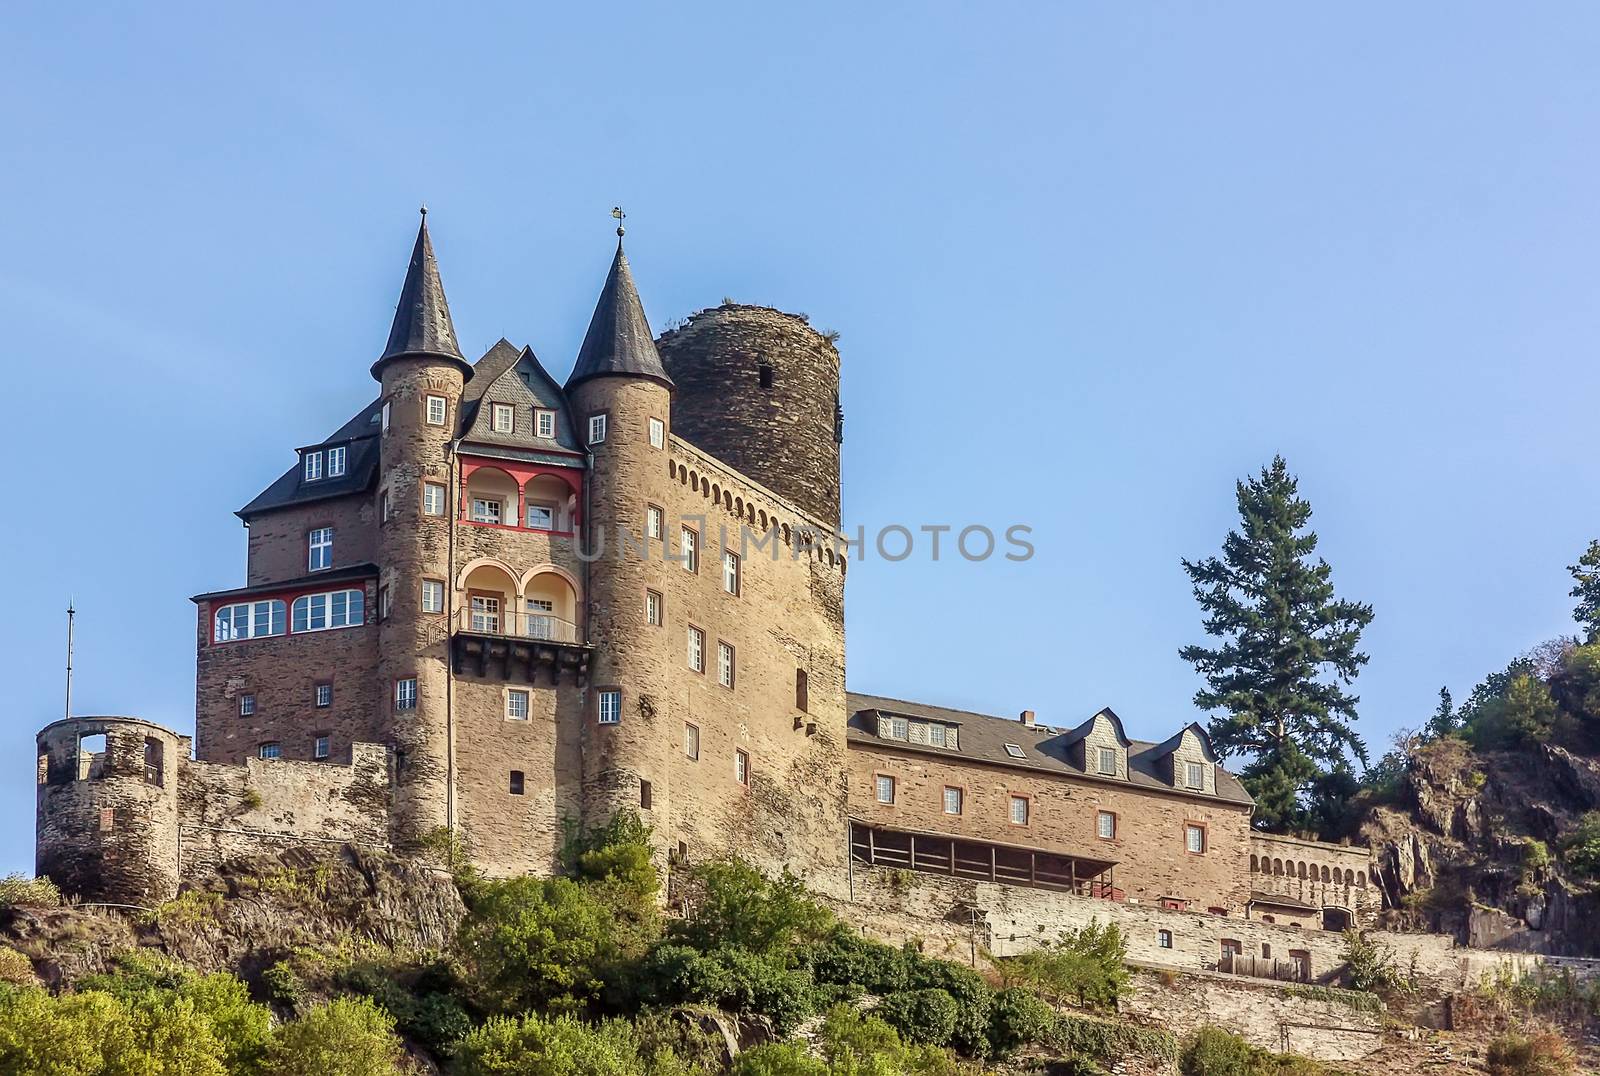 Katz Castle is magnificent castle stands on a ledge, looking downstream from the River Rhine